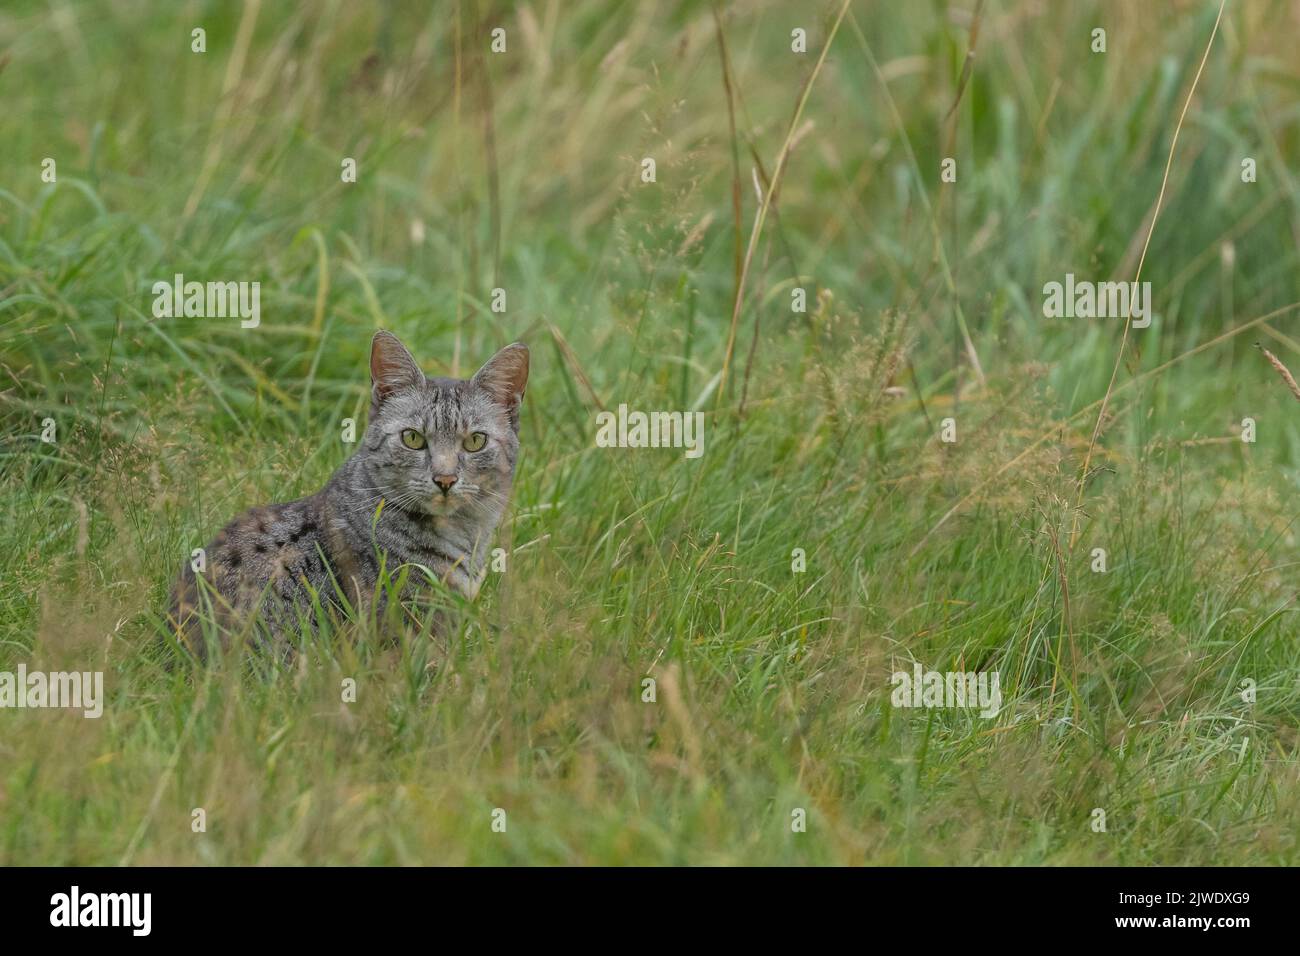 An Egyptian Mau cat in a field. Stock Photo